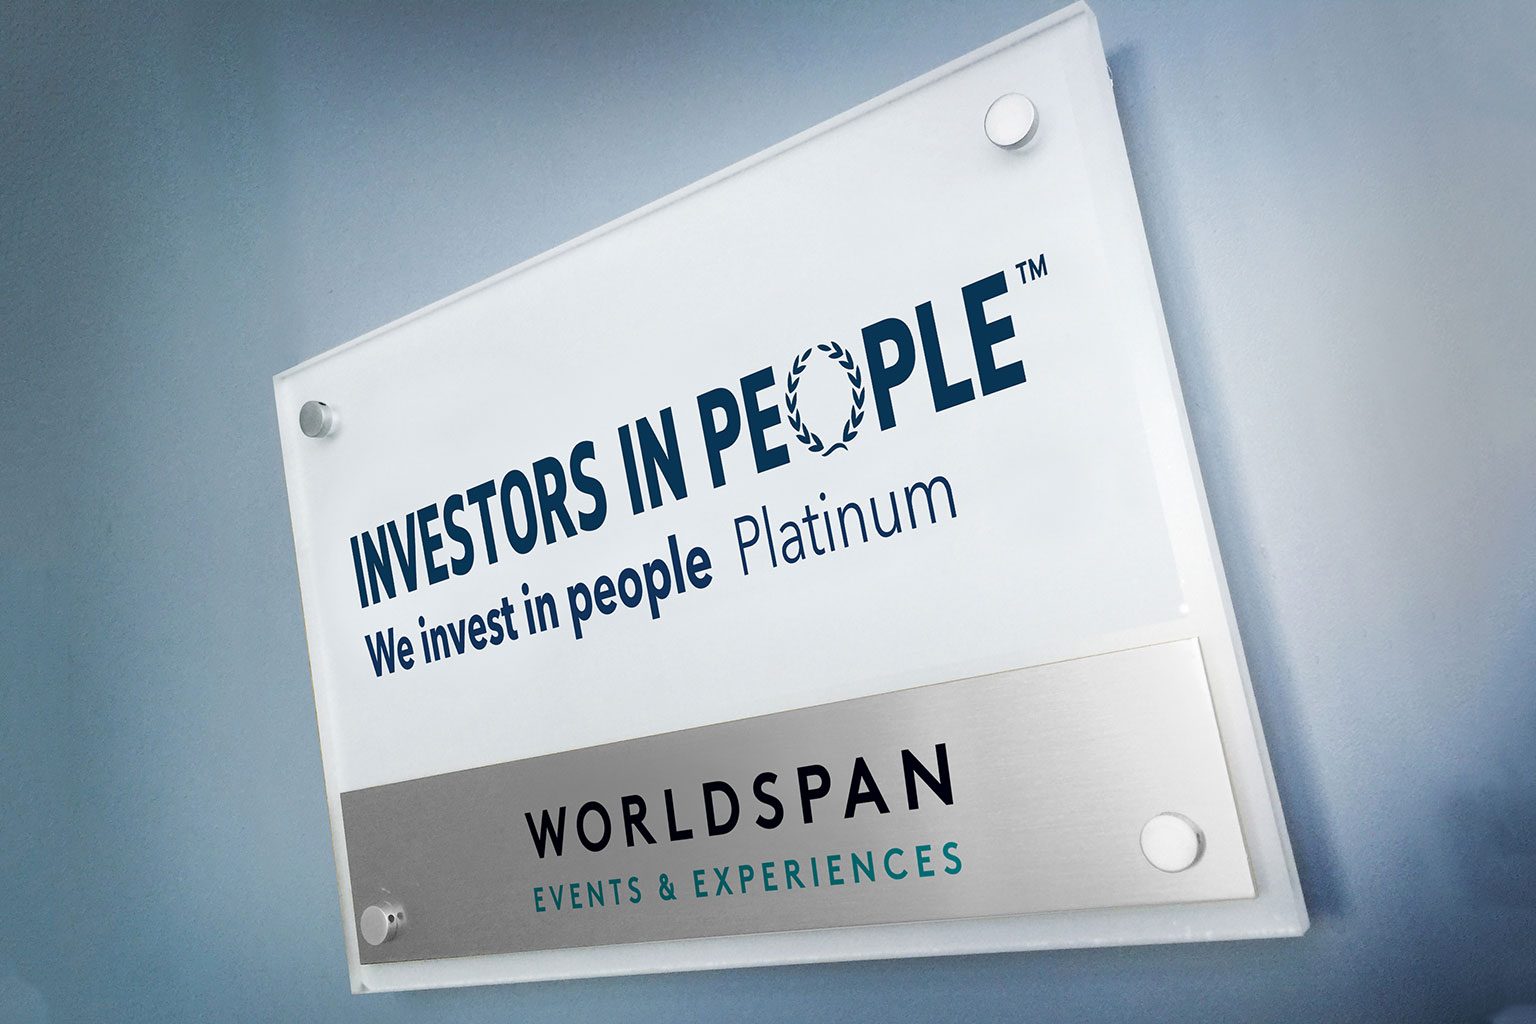 We’ve been awarded the We invest in people platinum accreditation